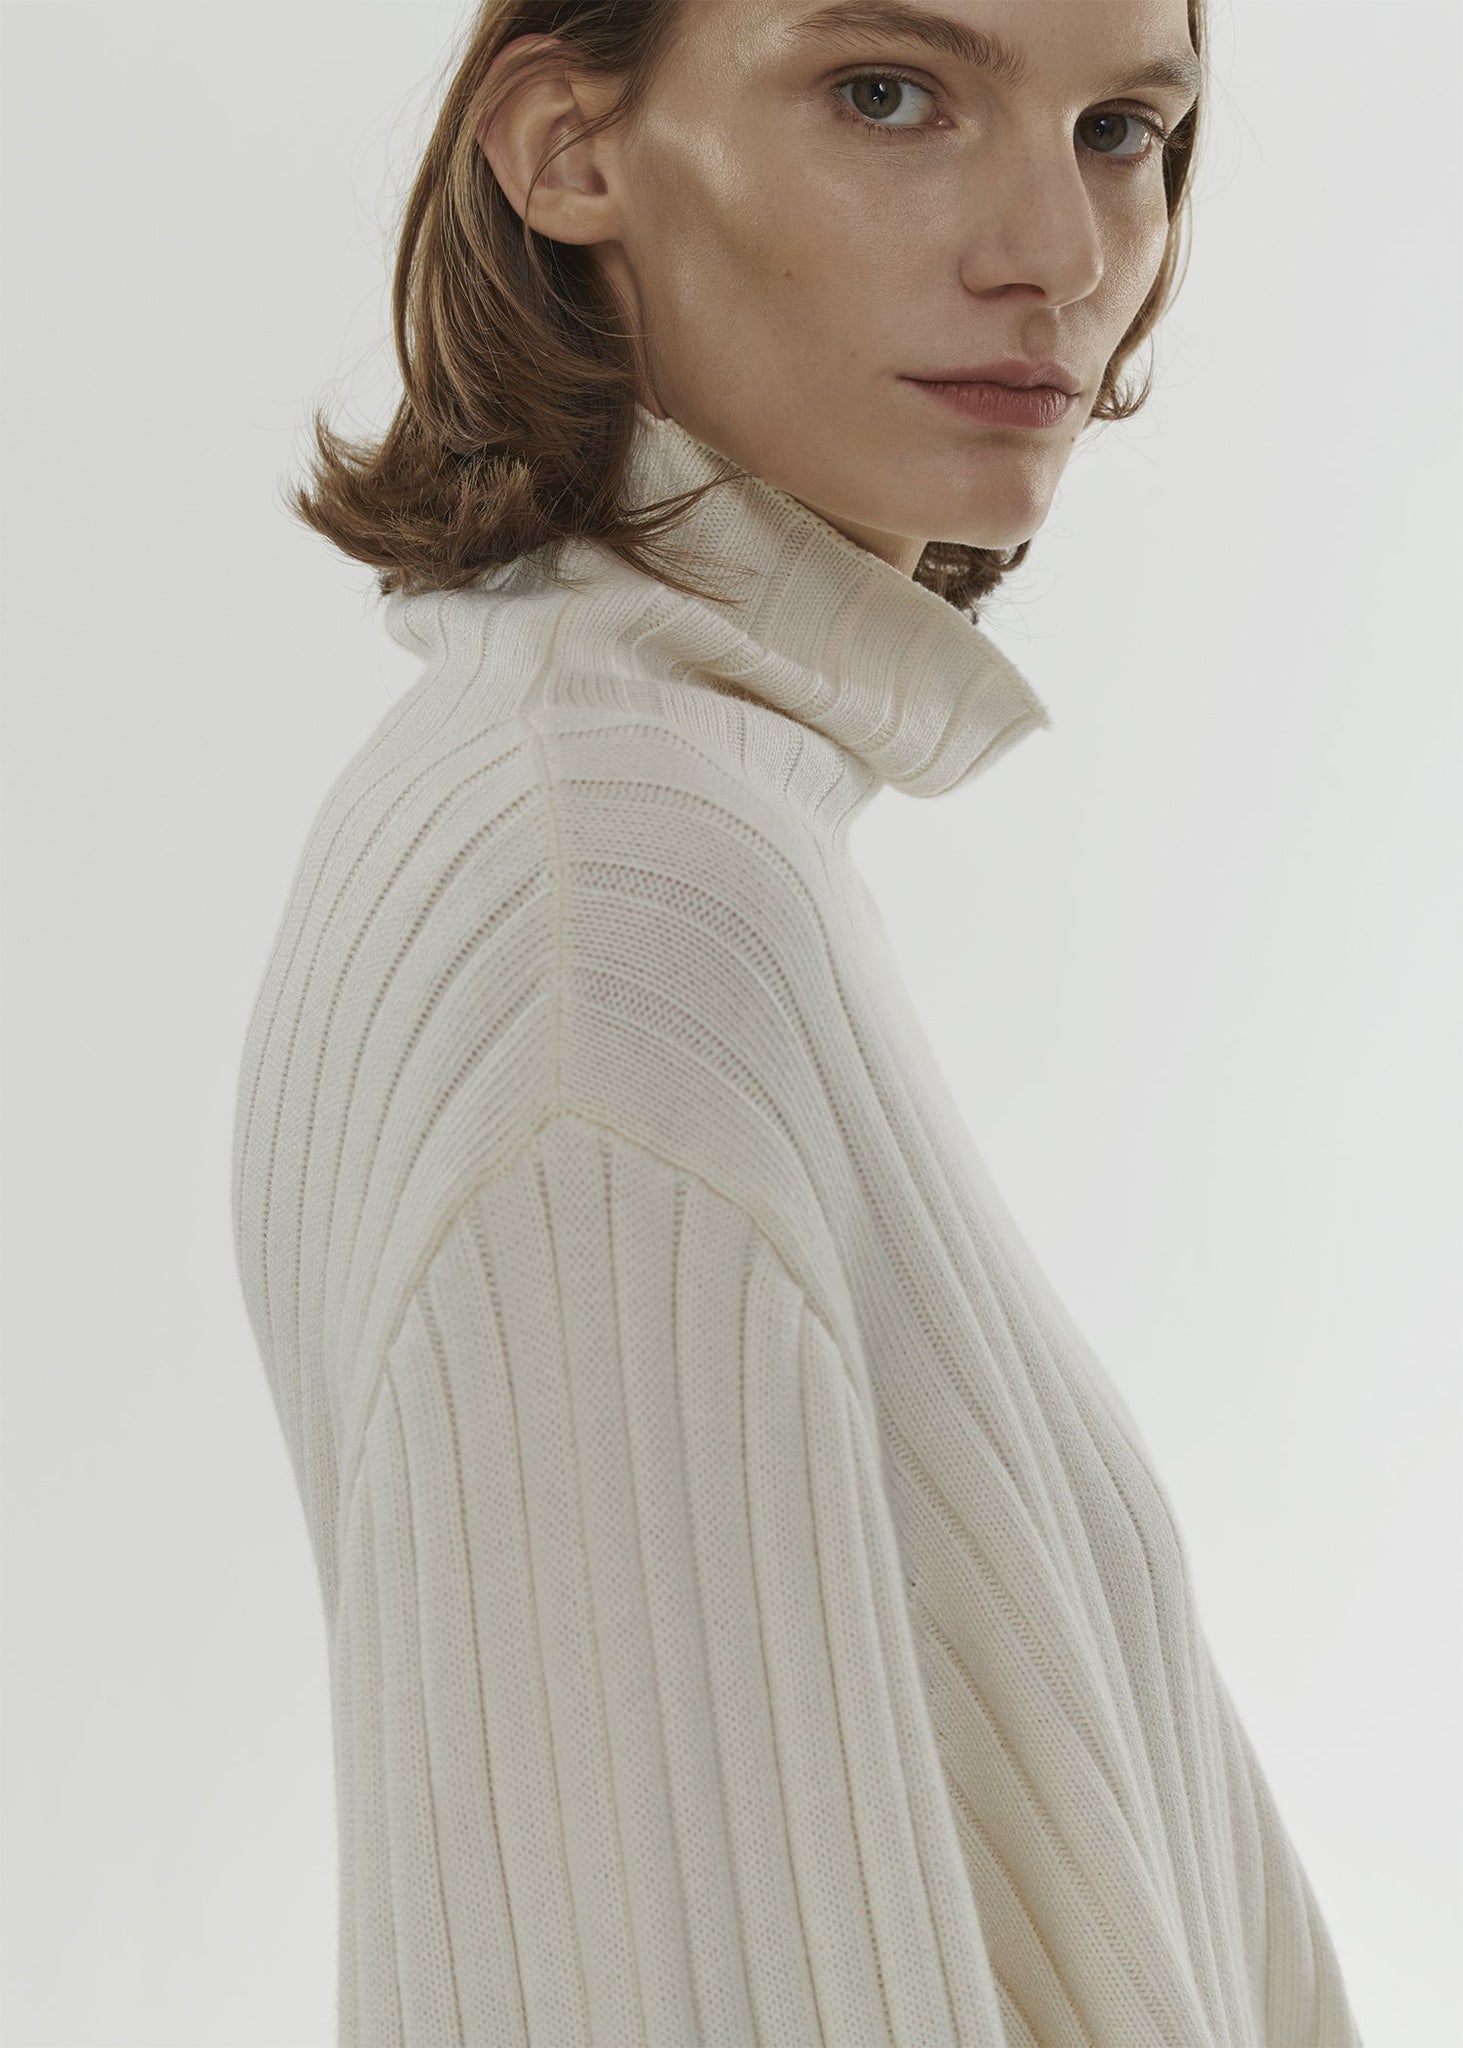 Cannes knit ivory